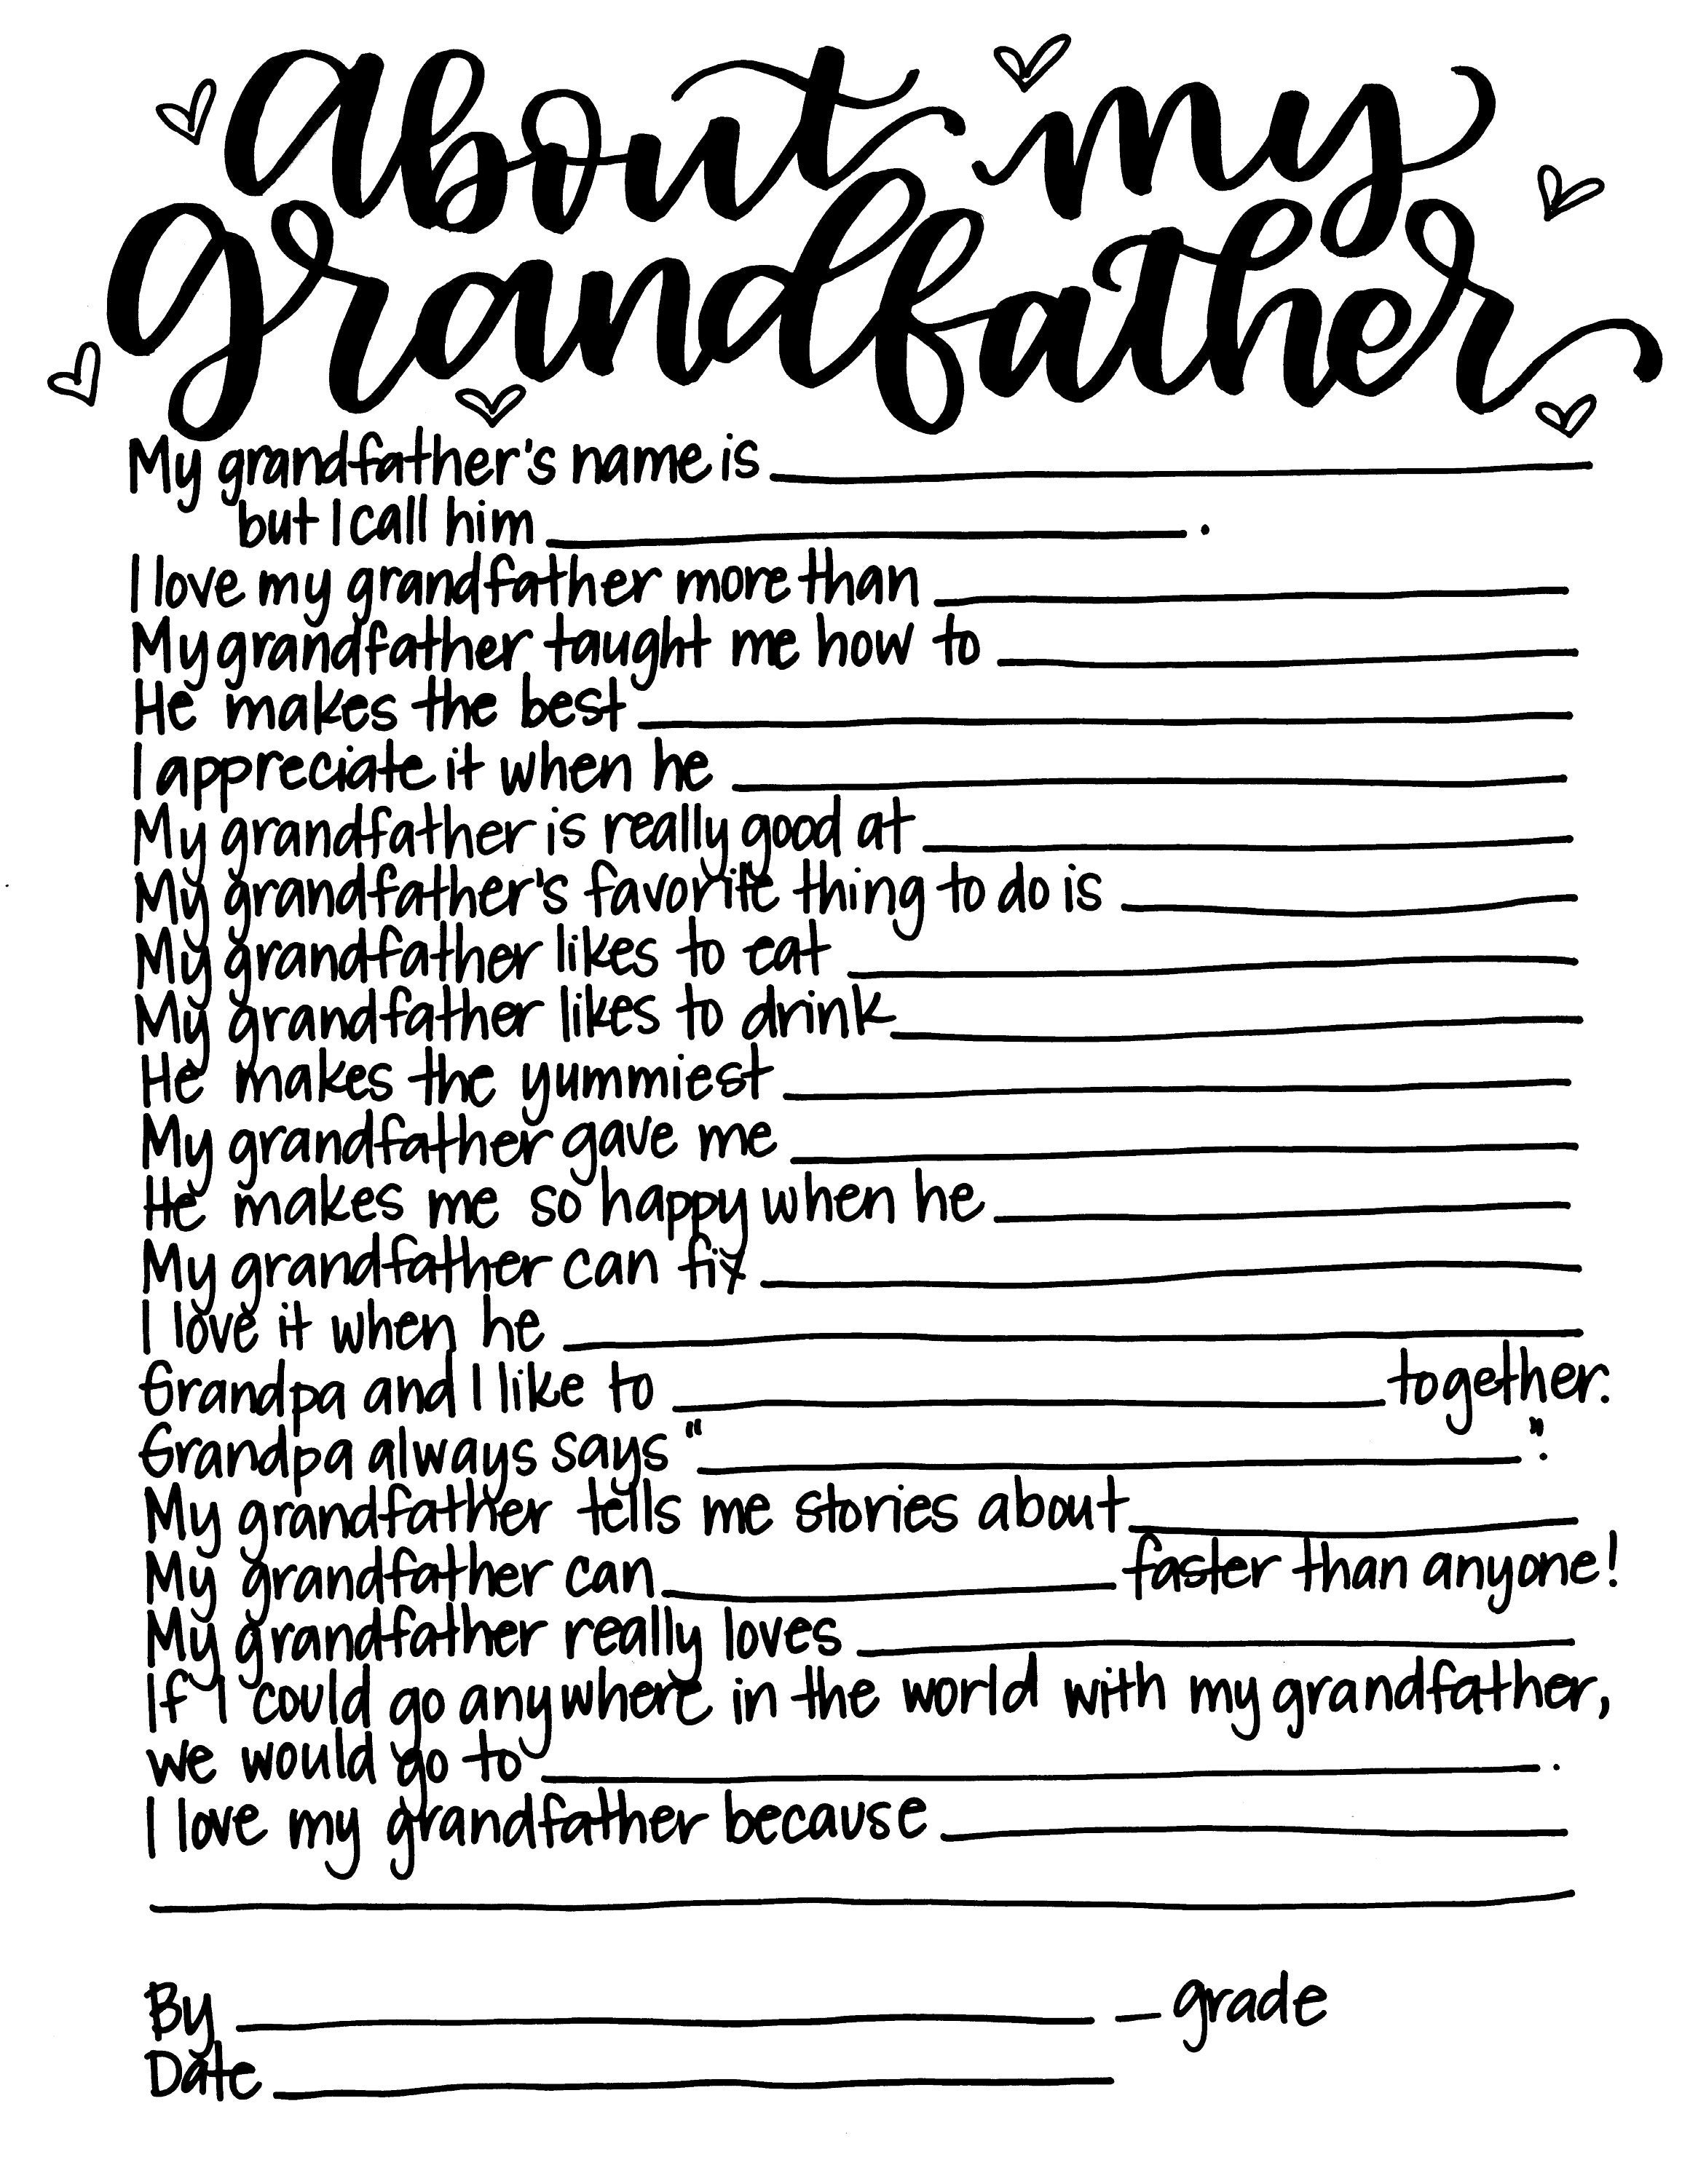 about-my-grandfather-father-s-day-activity-printable-kid-etsy